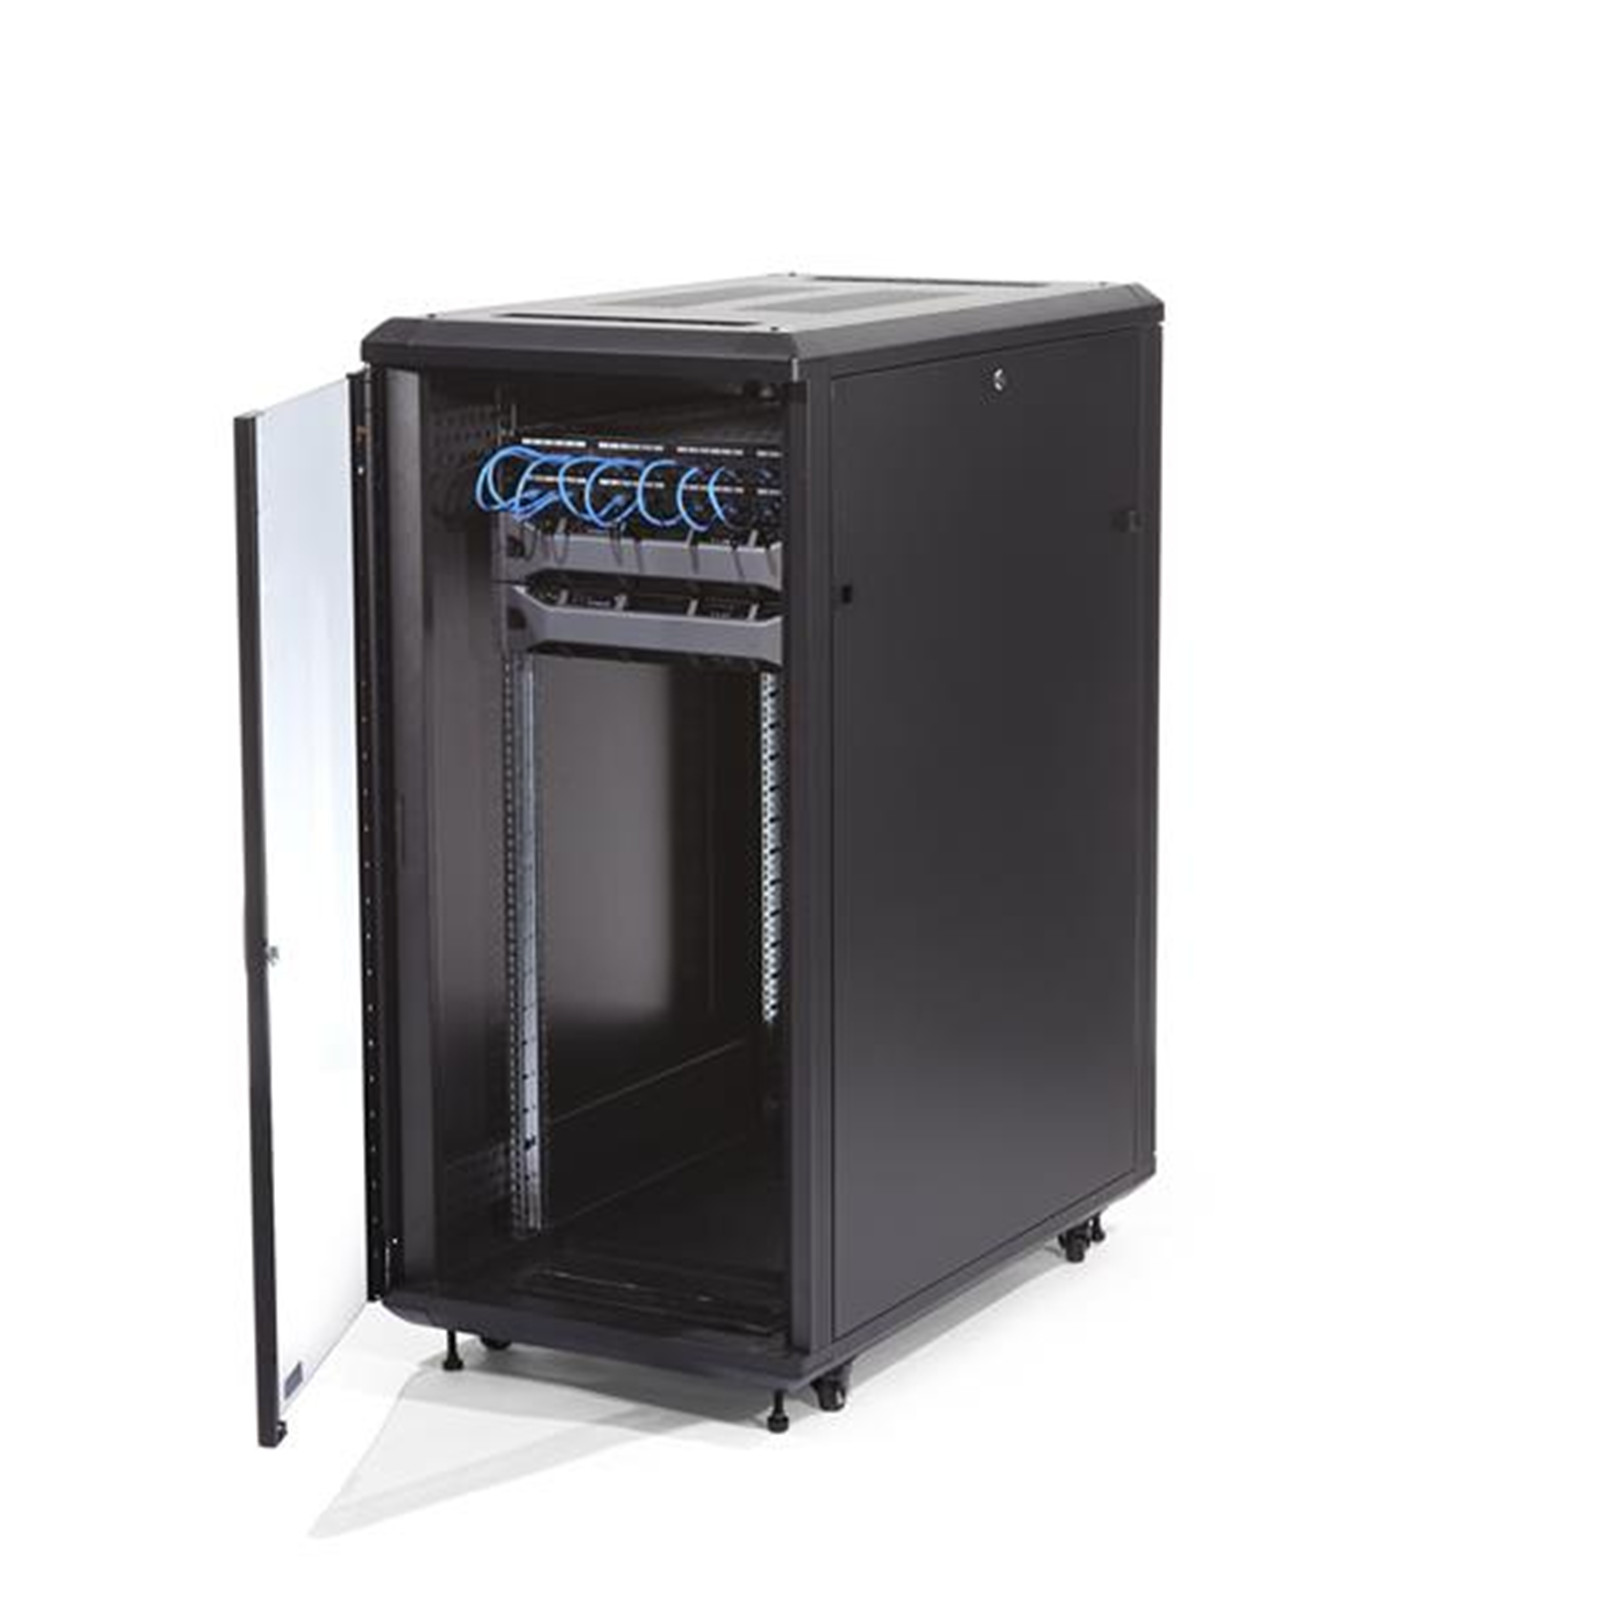 Buy the StarTech RK2536BKF 25U 36in Knock-Down Server Rack Cabinet with...  ( RK2536BKF ) online - PBTech.com/au